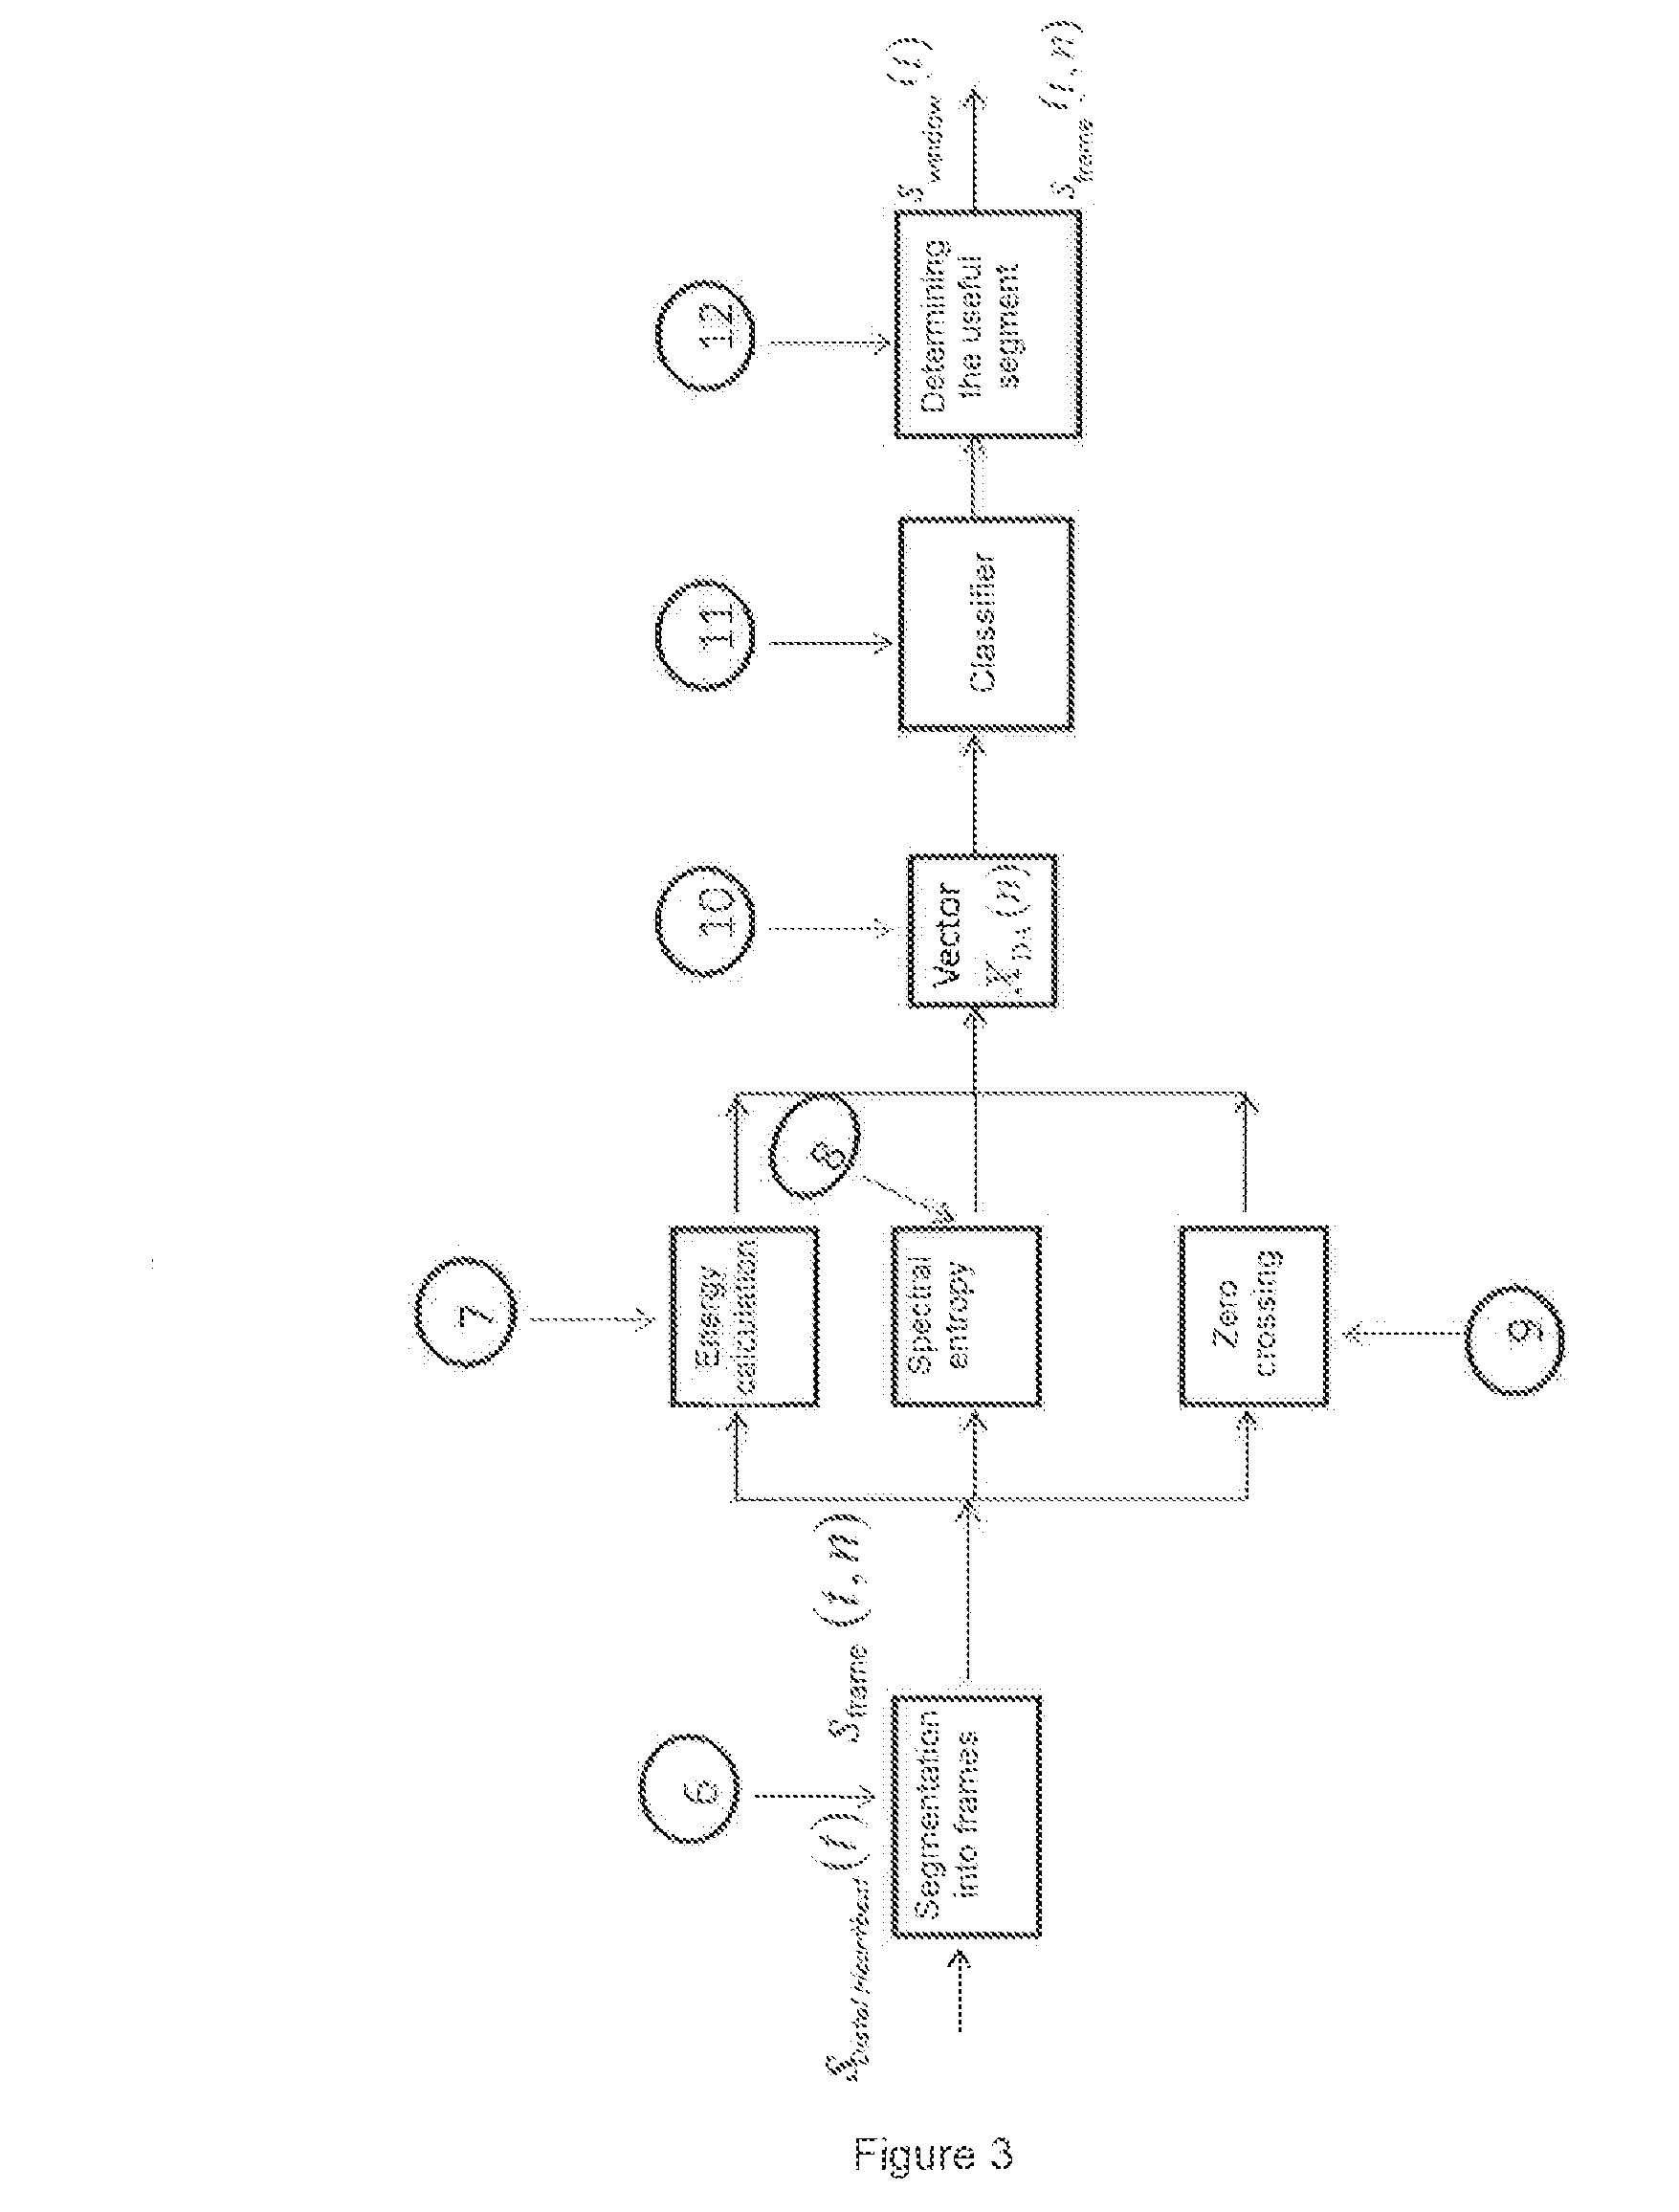 System and method for the simultaneous, non-invasive estimation of blood glucose, glucocorticoid level and blood pressure